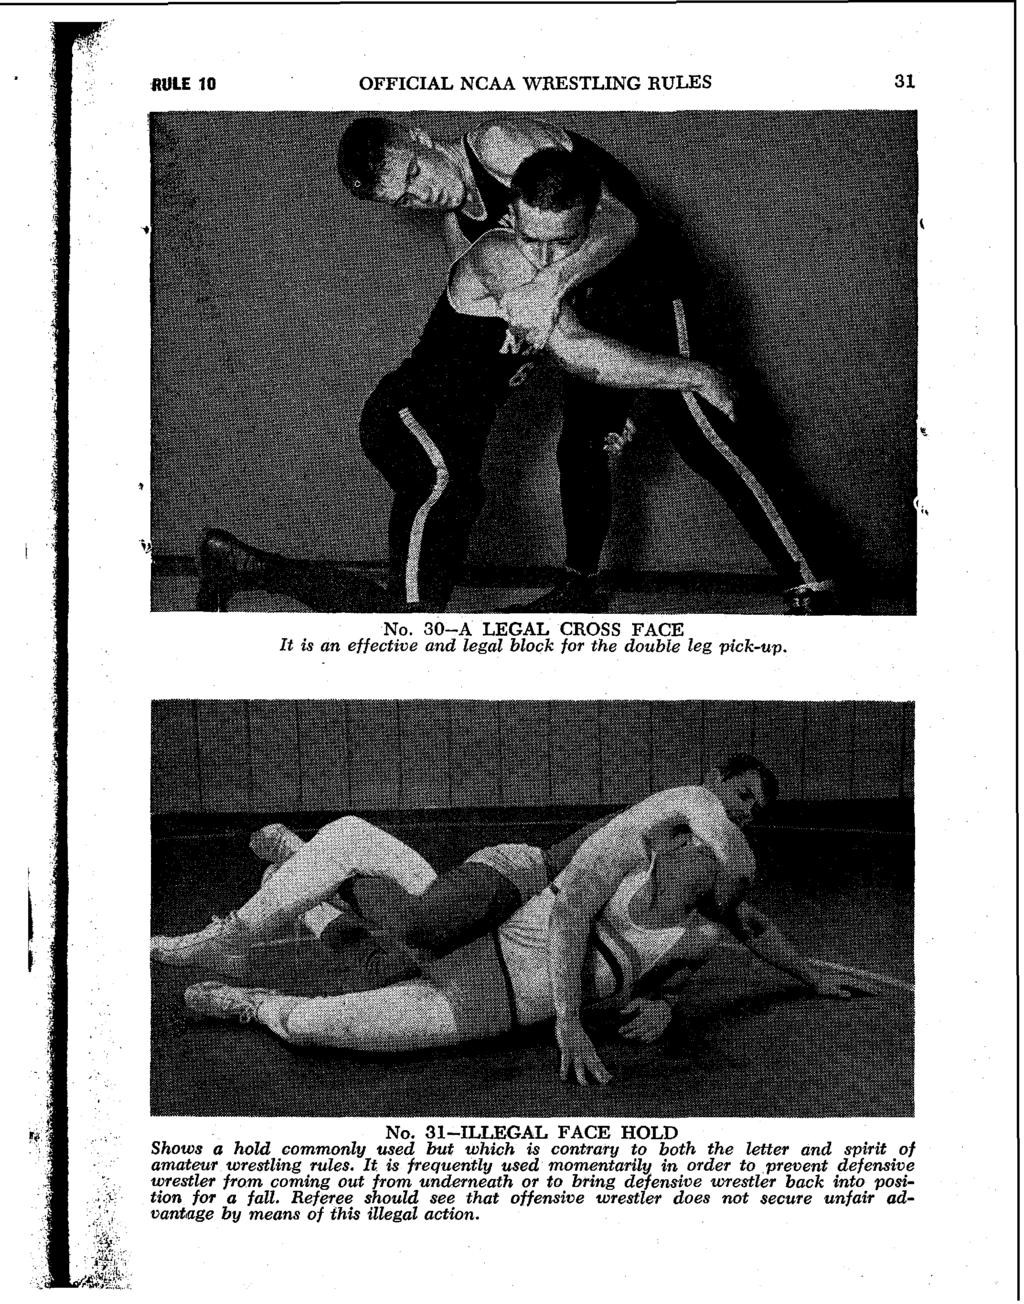 aule 10 OFFICIAL NCAA WRESTLING RULES 3 1 NO. 30-A LEGAL CROSS FACE It is an effectzve and legal block for the double leg pick-up. NO. 31-ILLEGAL FACE HOLD Shows a hold commonly used but which is contrary to both the letter and spirit of amateur wrestling rules.